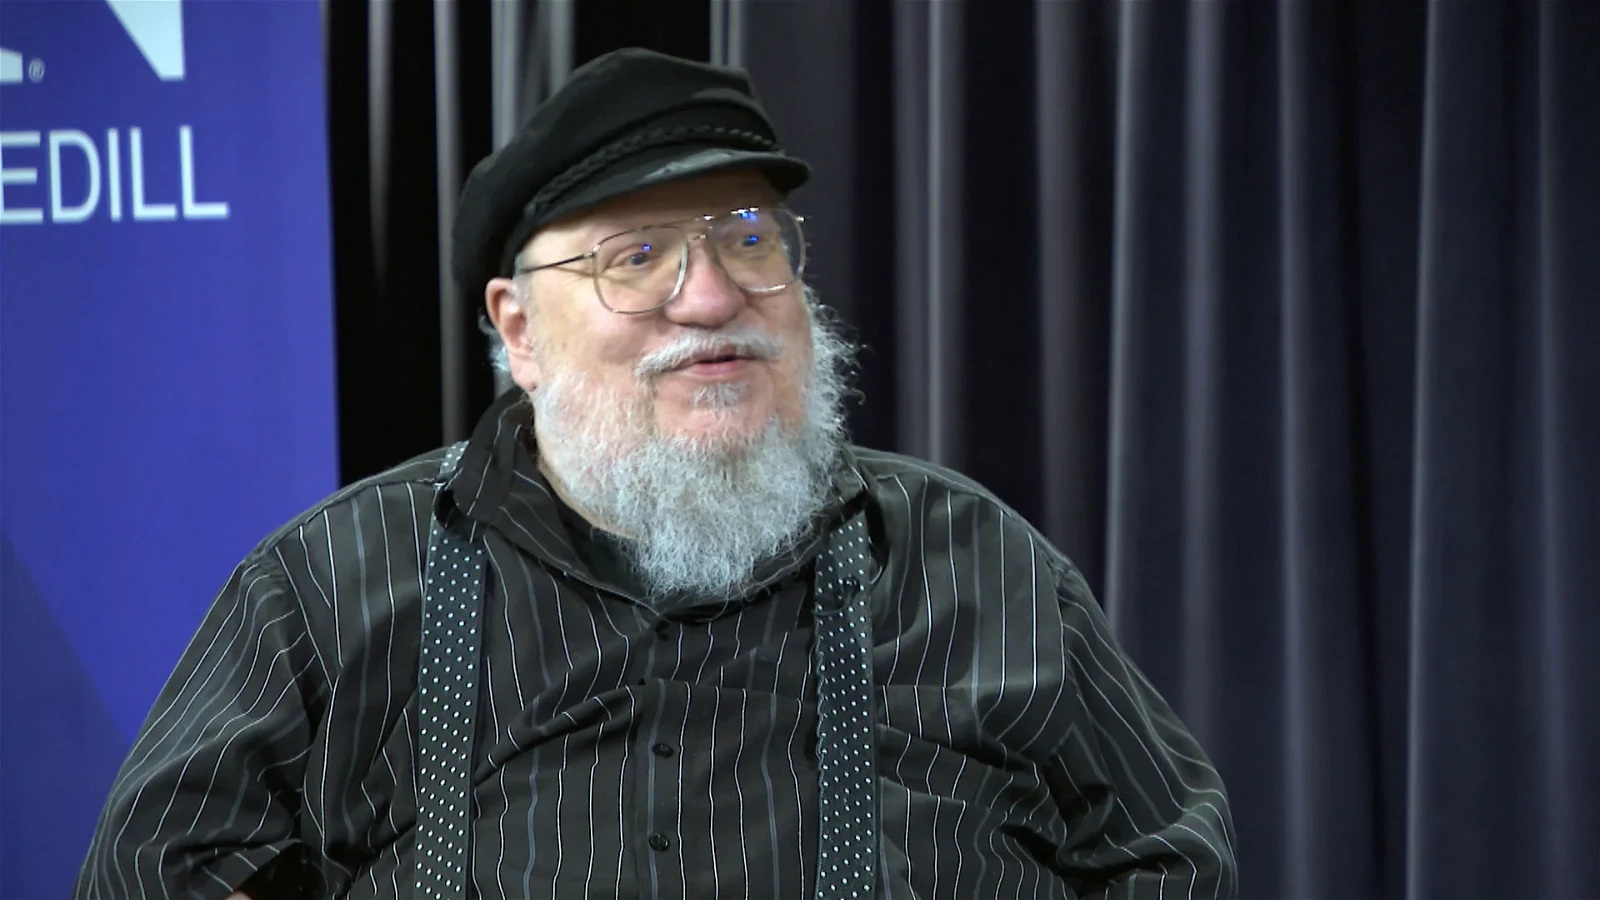 Author George R.R. Martin in an interview with WTTW News